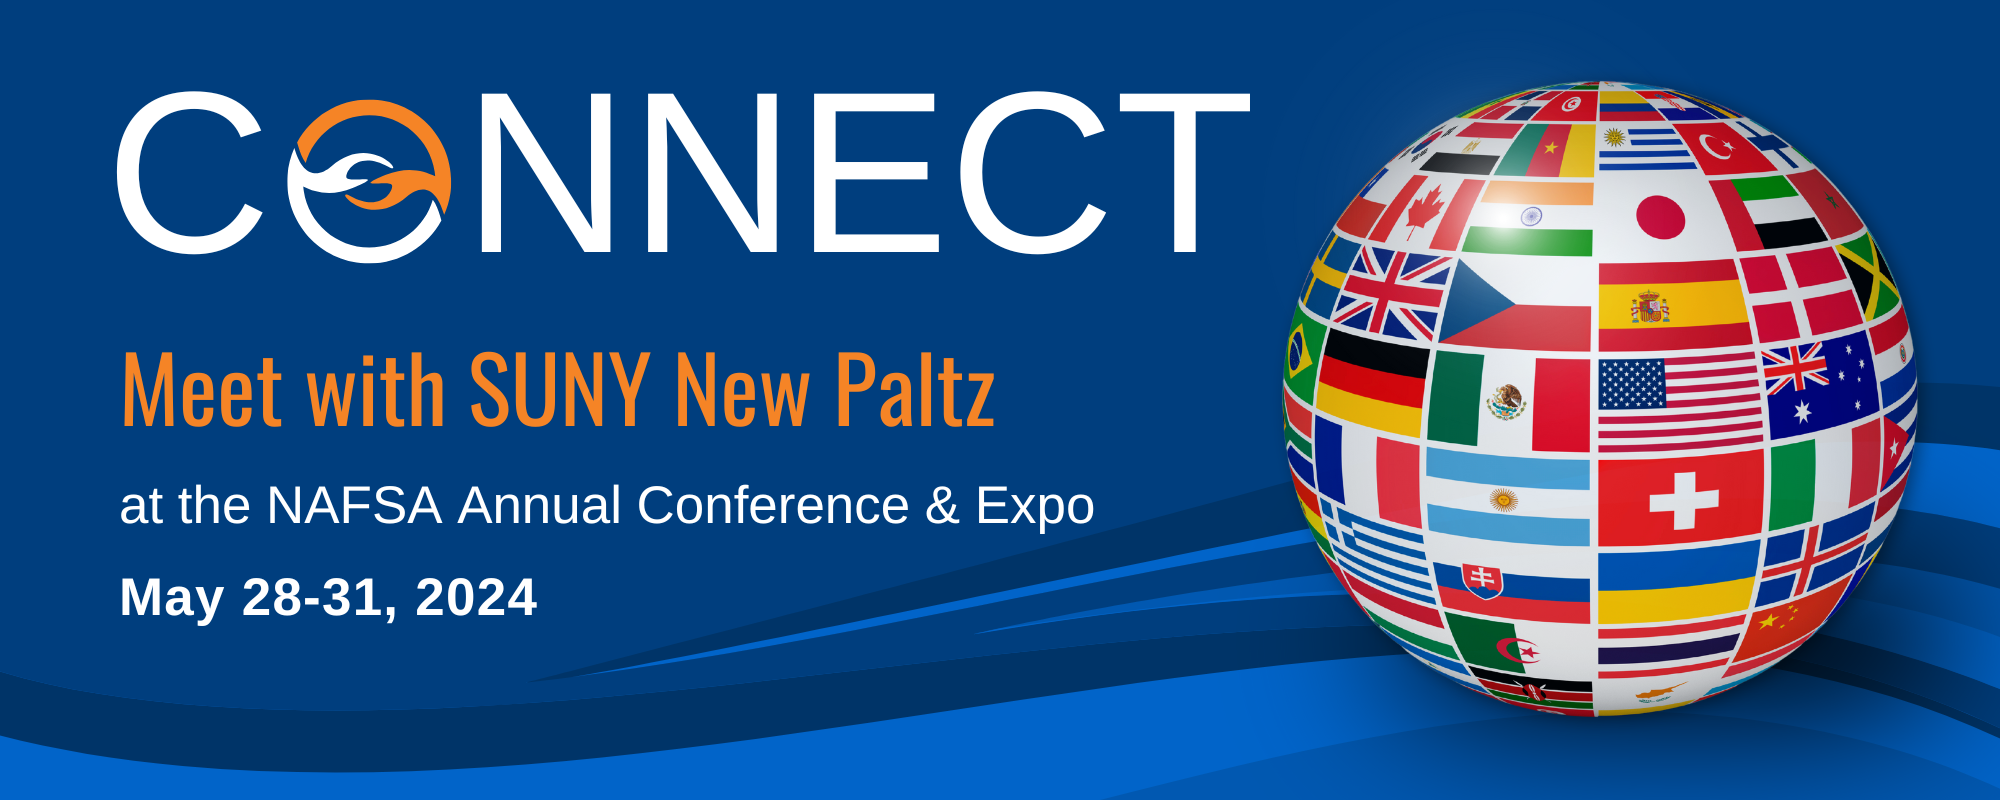 Meet with SUNY New Paltz at the NAFSA Annual Conference & Expo, May 28-31, 2024